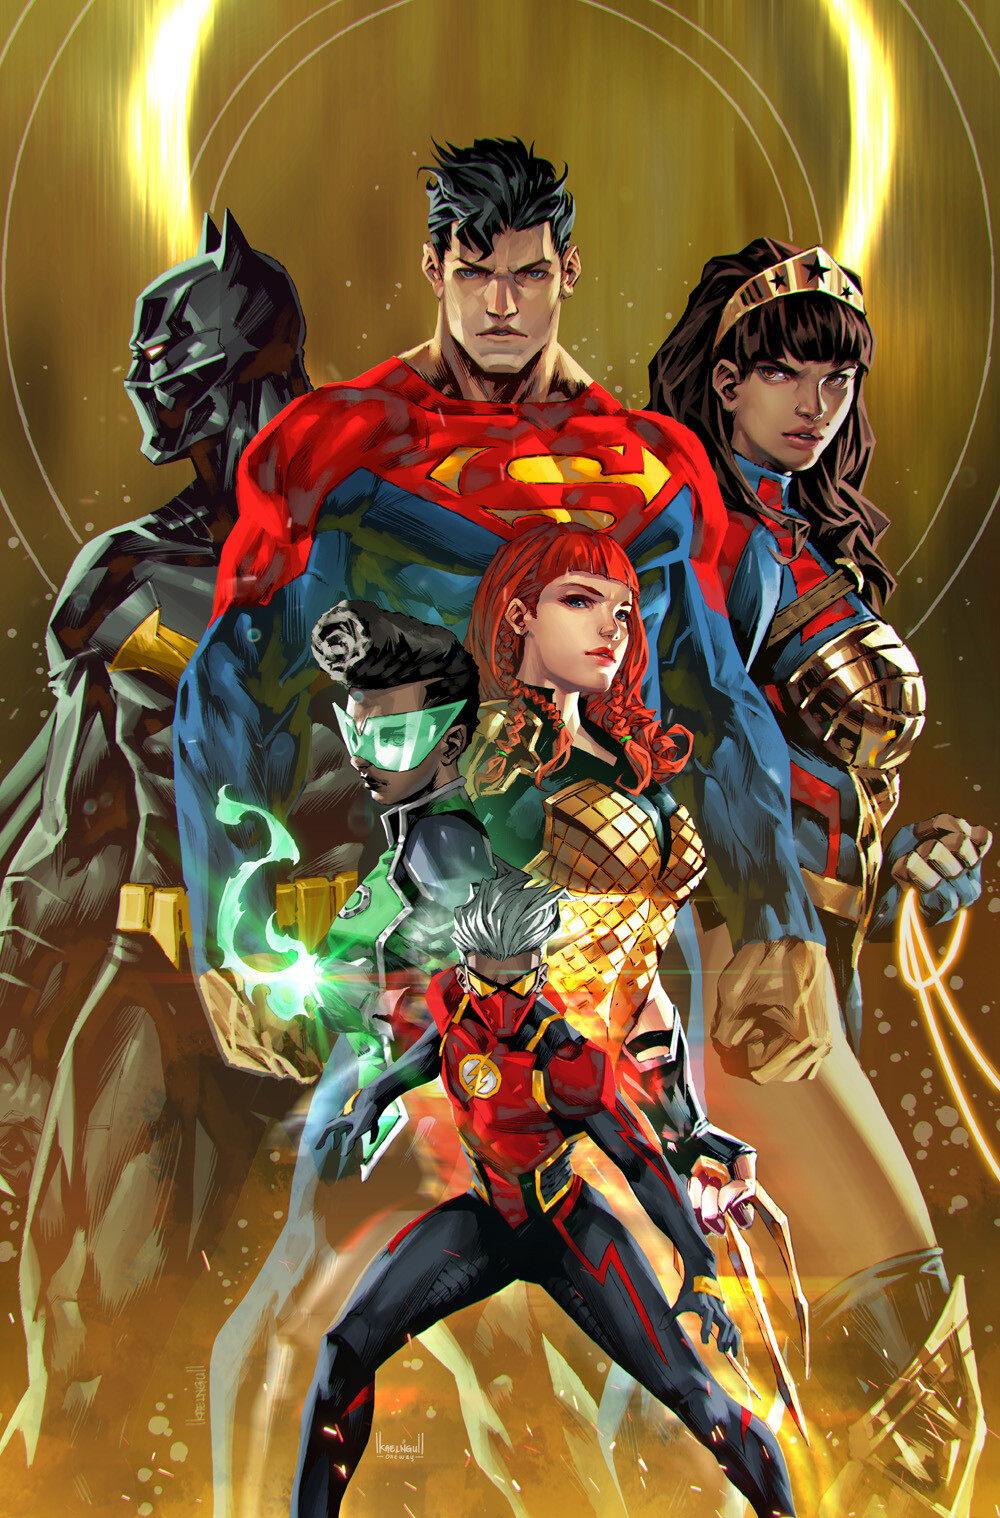 Future State : Justice League #2 
RELEASES FEB 9TH, 2021